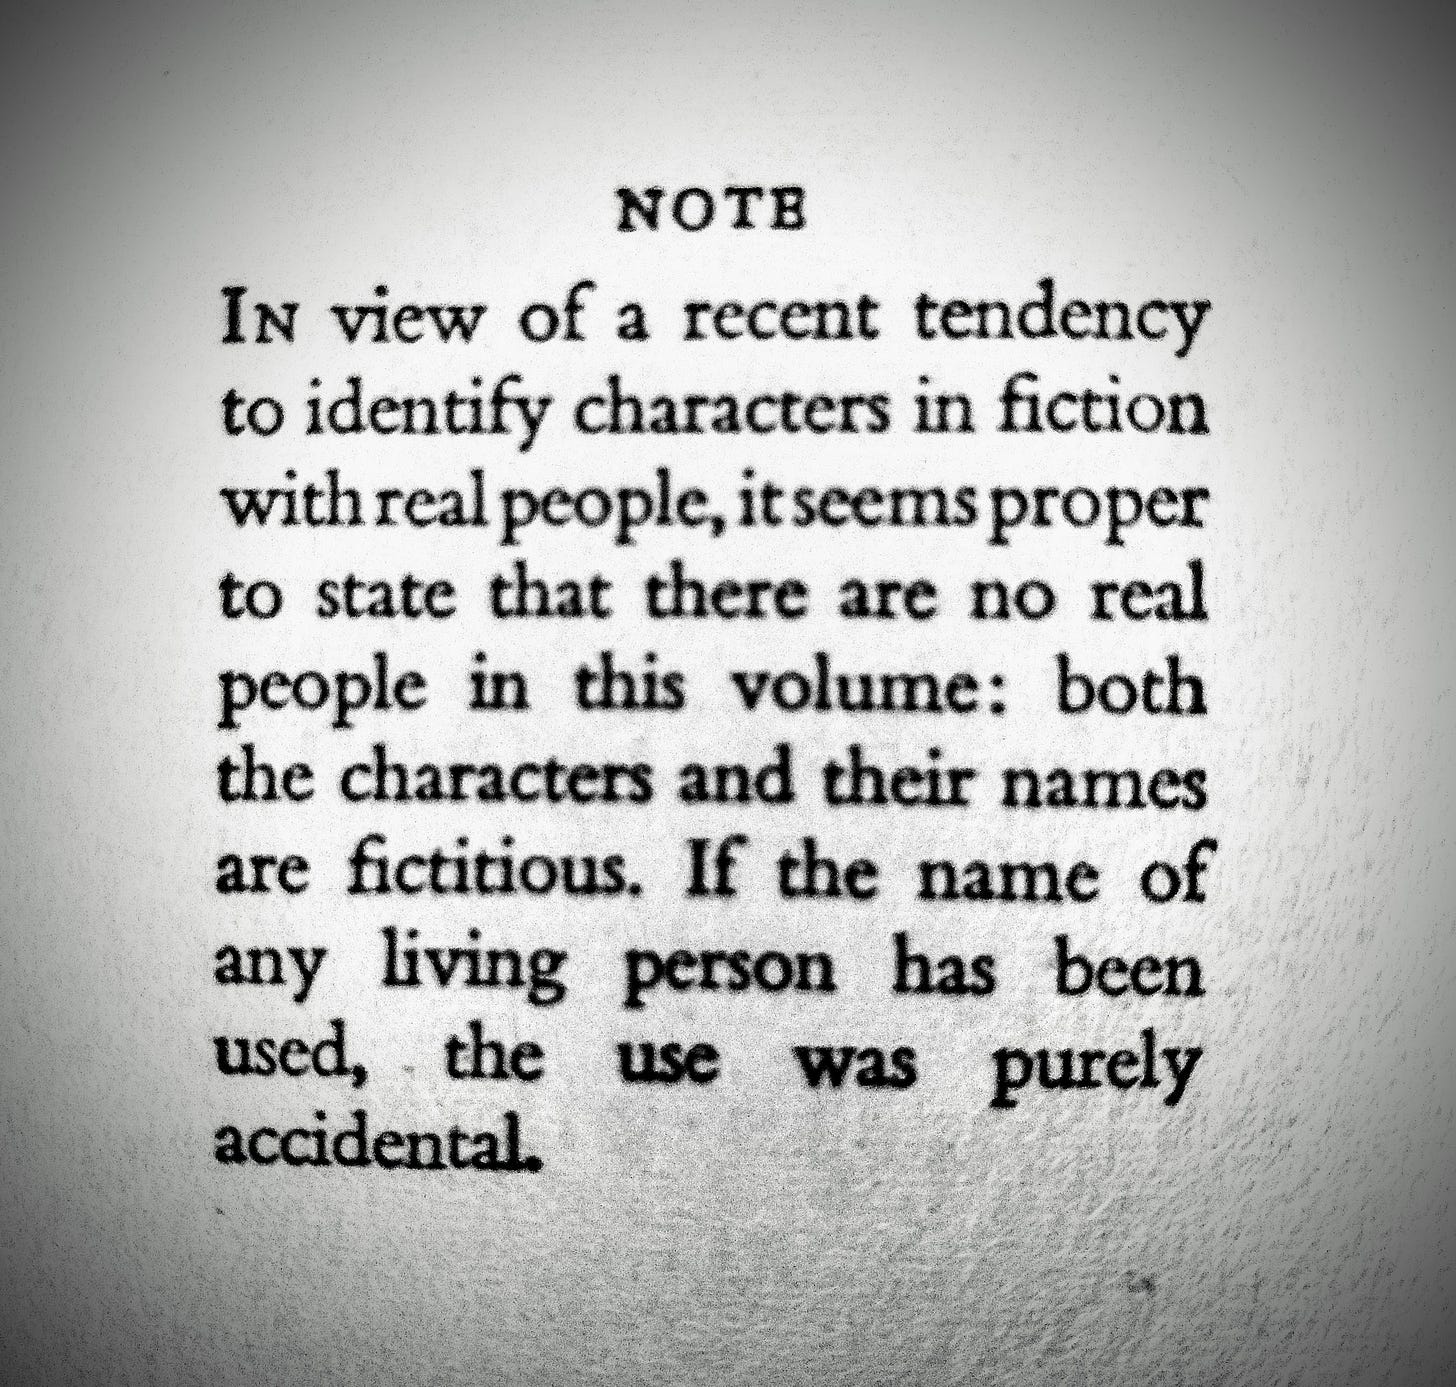 NOTE: In view of a recent tendency to identify characters in fiction with real people, it seems proper to state that there are no real people in this volume: both the characters and their names are fictitious. If the name of any living person has been used. the use was purely accidental.